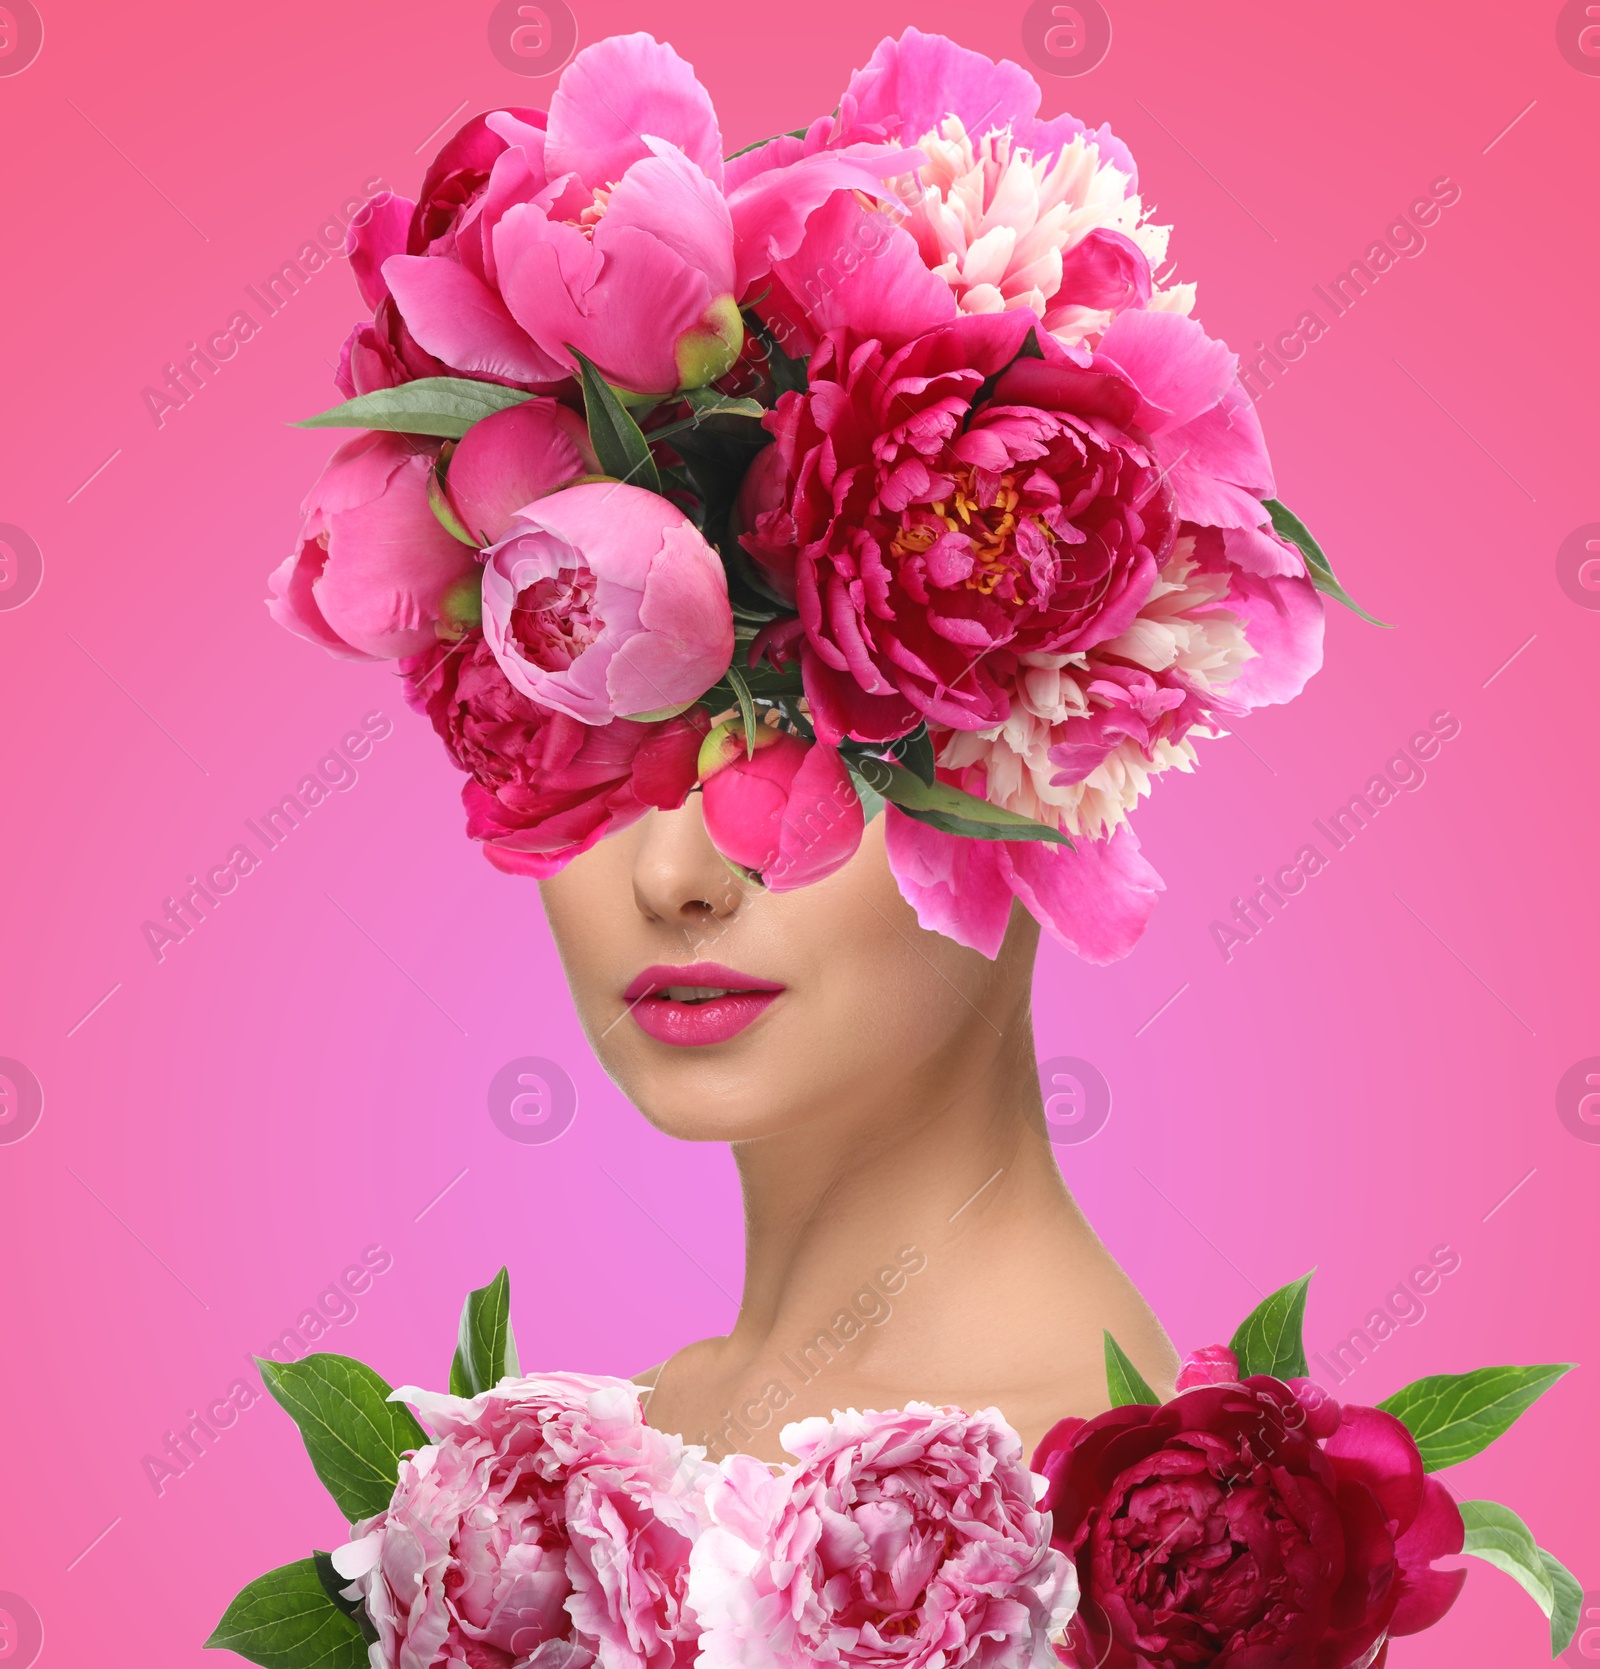 Image of Art collage with woman and peony flowers on pink background